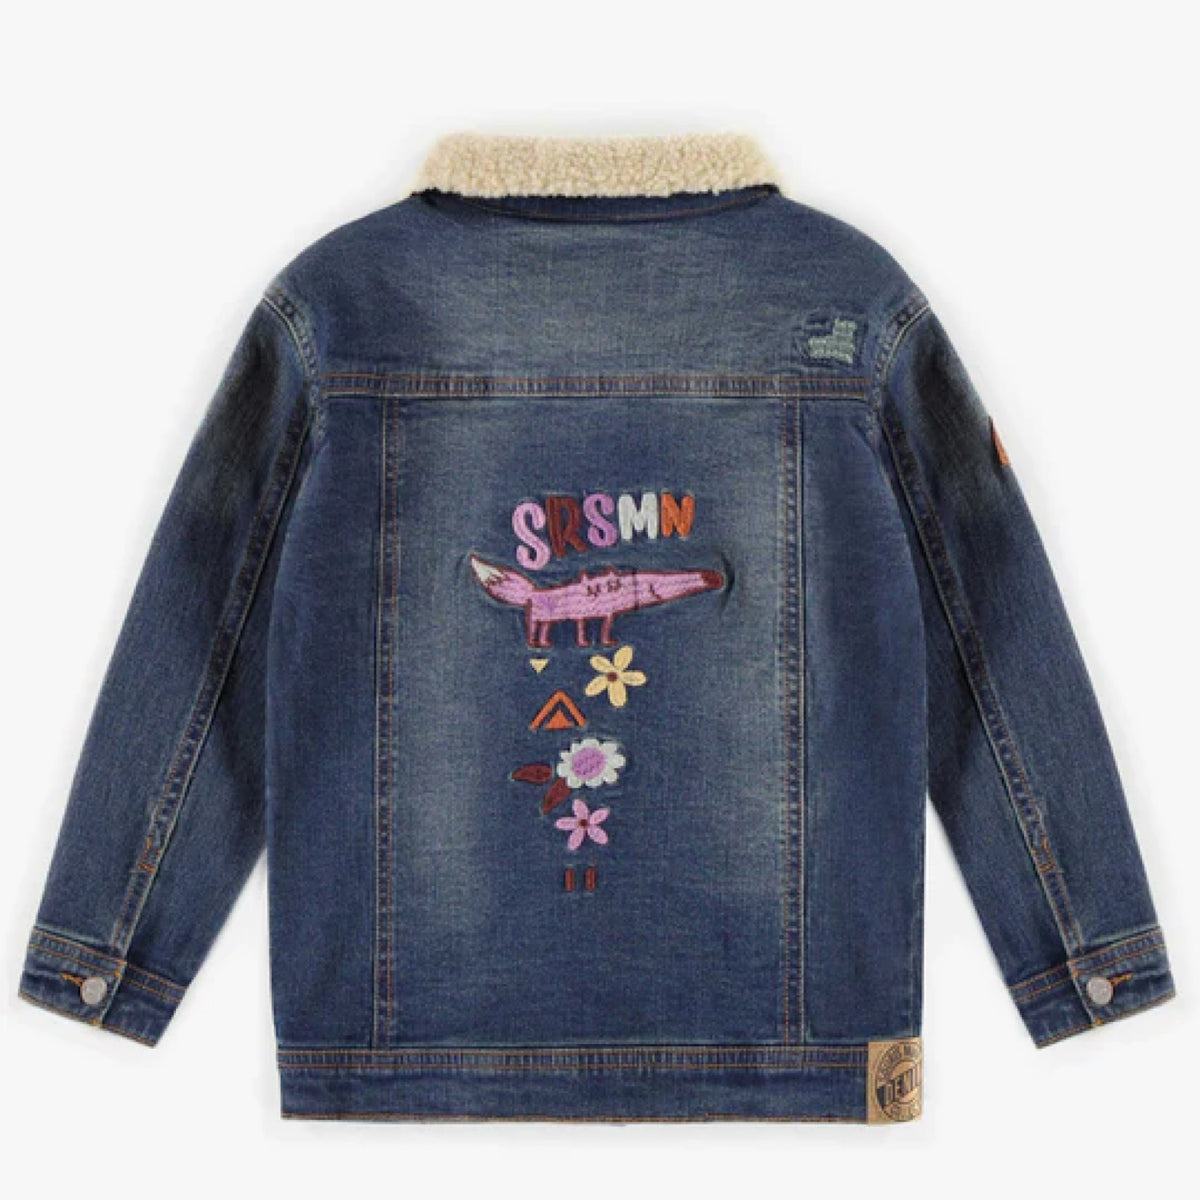 Embroidered Denim Jacket with Sherpa Collar